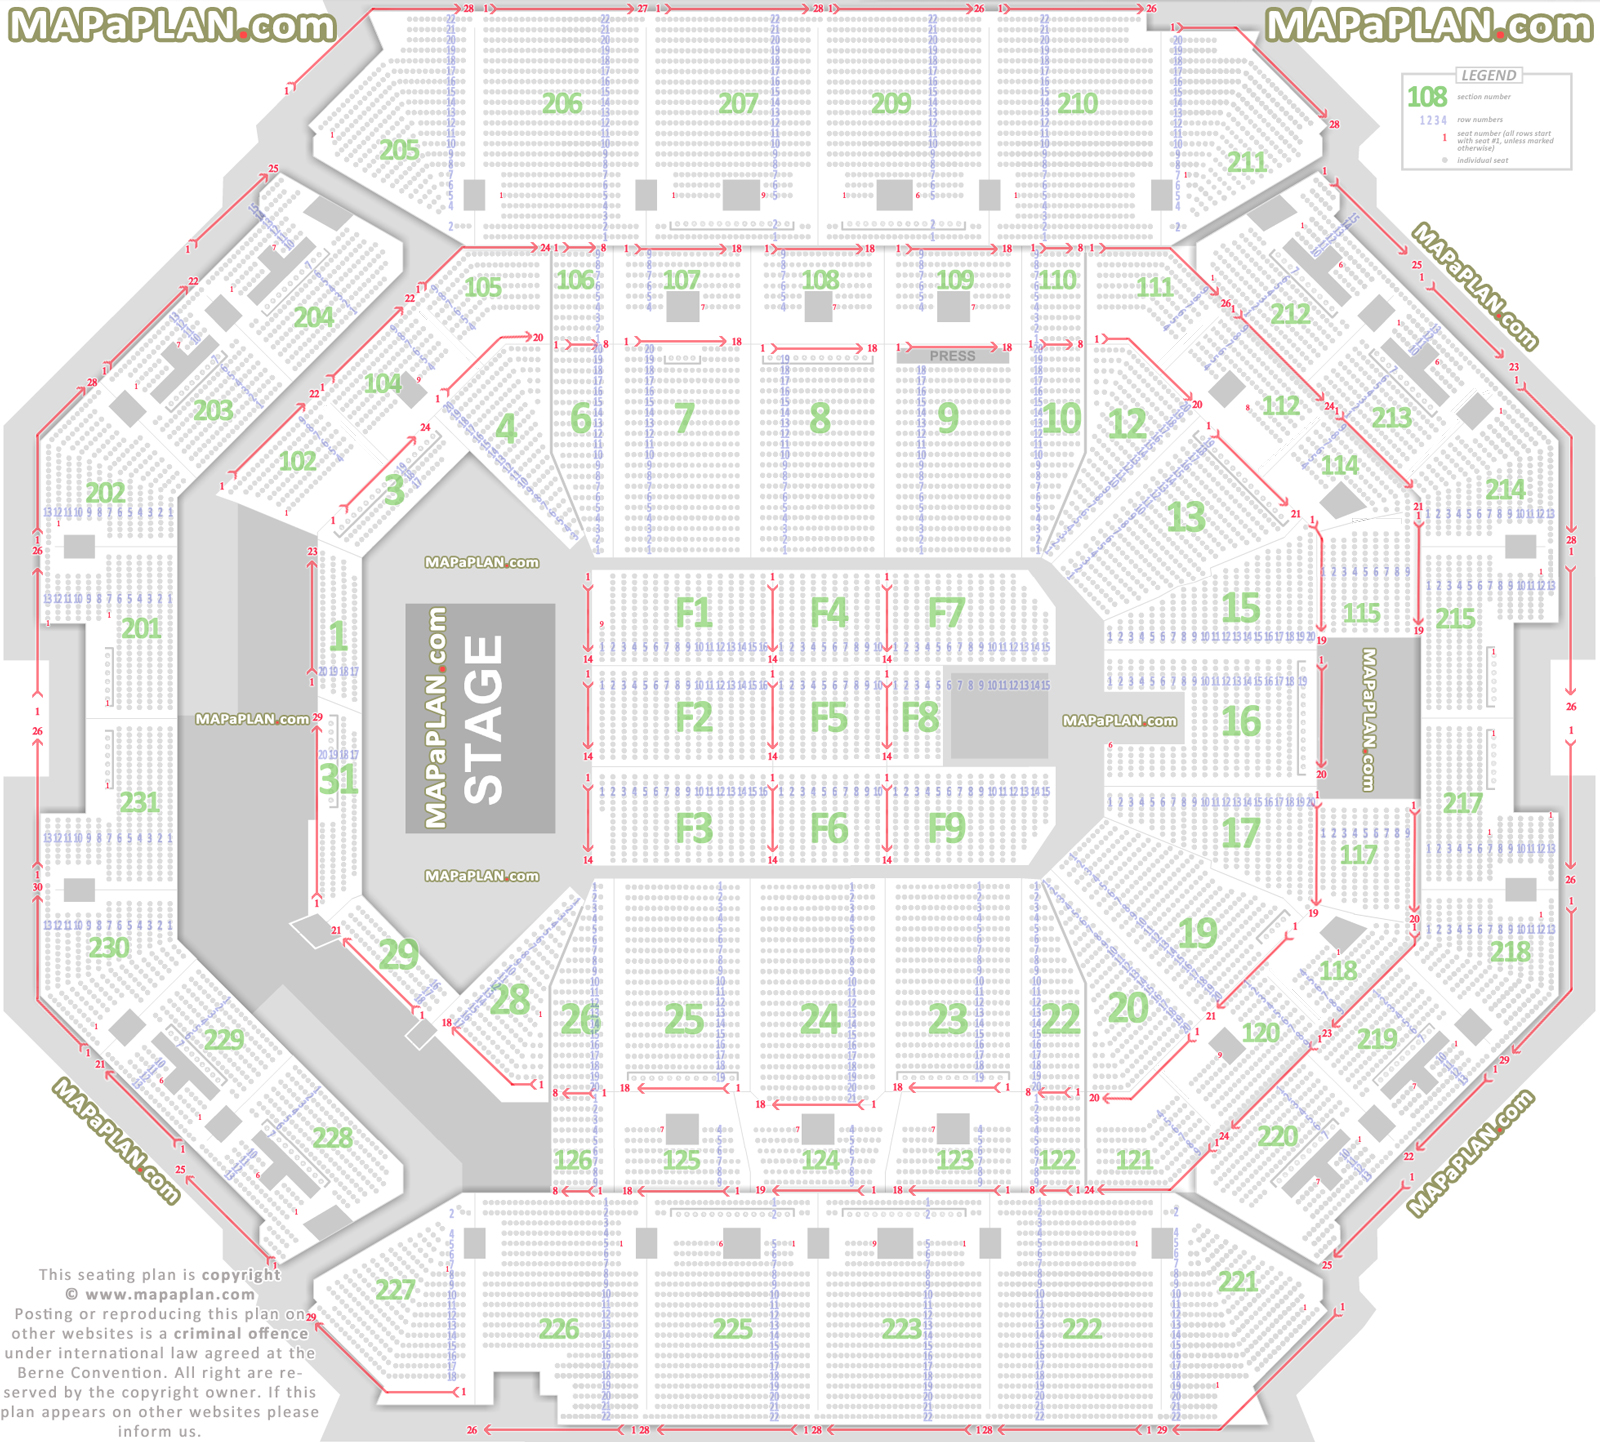 Barclays Center Nets Seating Chart